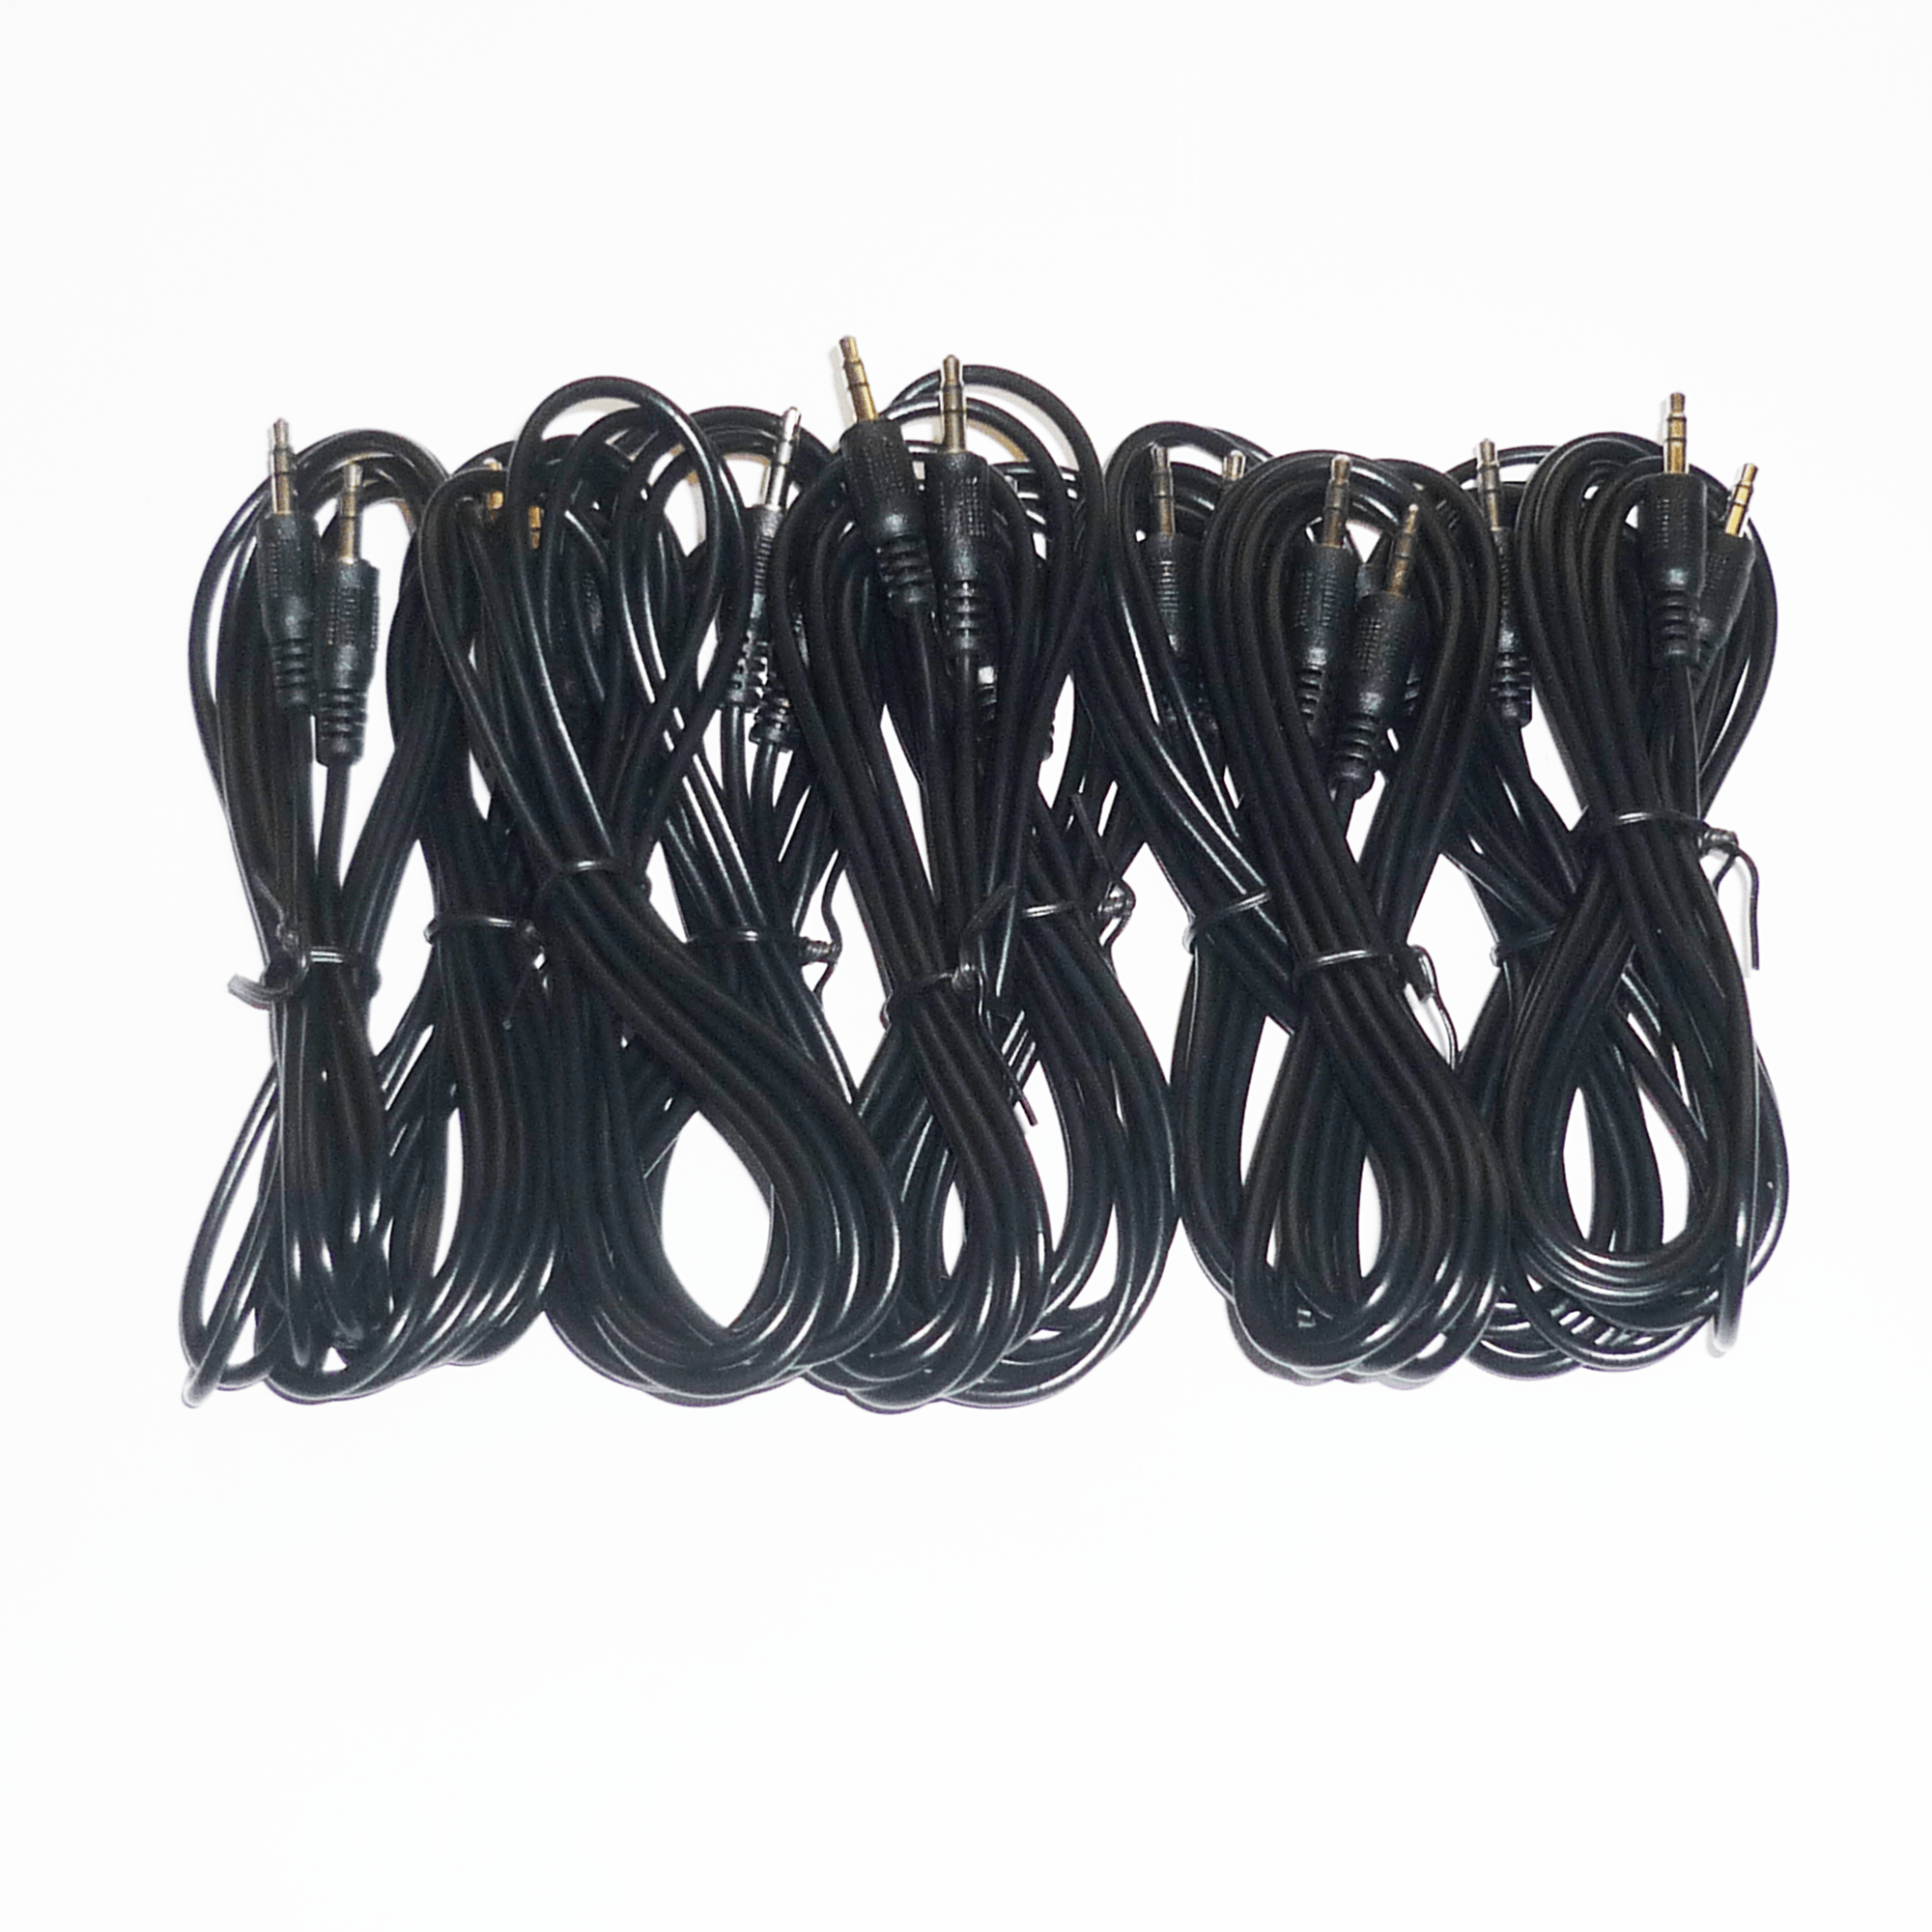 Black Audio Lead 3.5mm Jack to 3.5 mm Jack Cable Length 2 metres